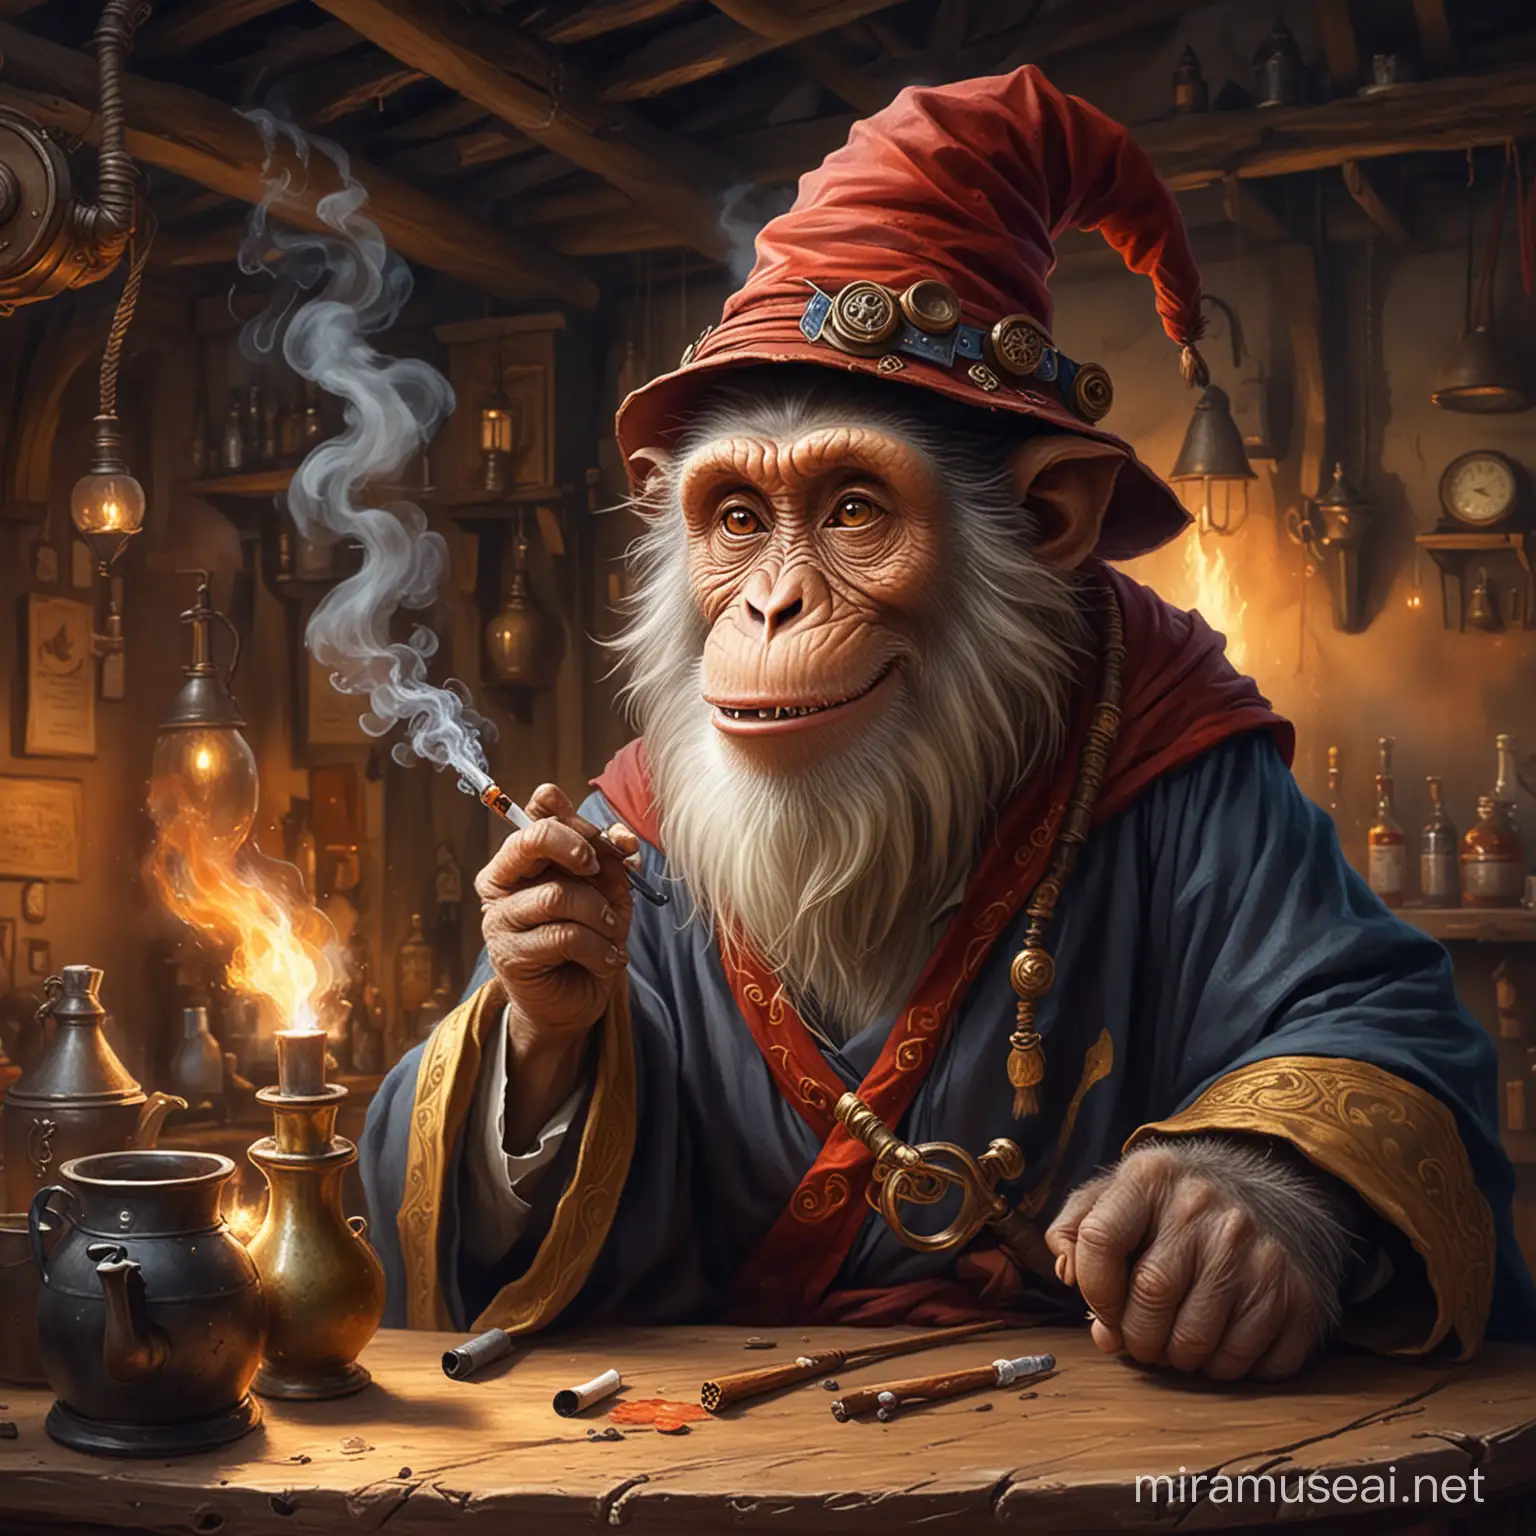 bearded monkey wizard with wizard hat and robes smoking from pipe with smurky smile, inside of a busy tavern, oil painting style